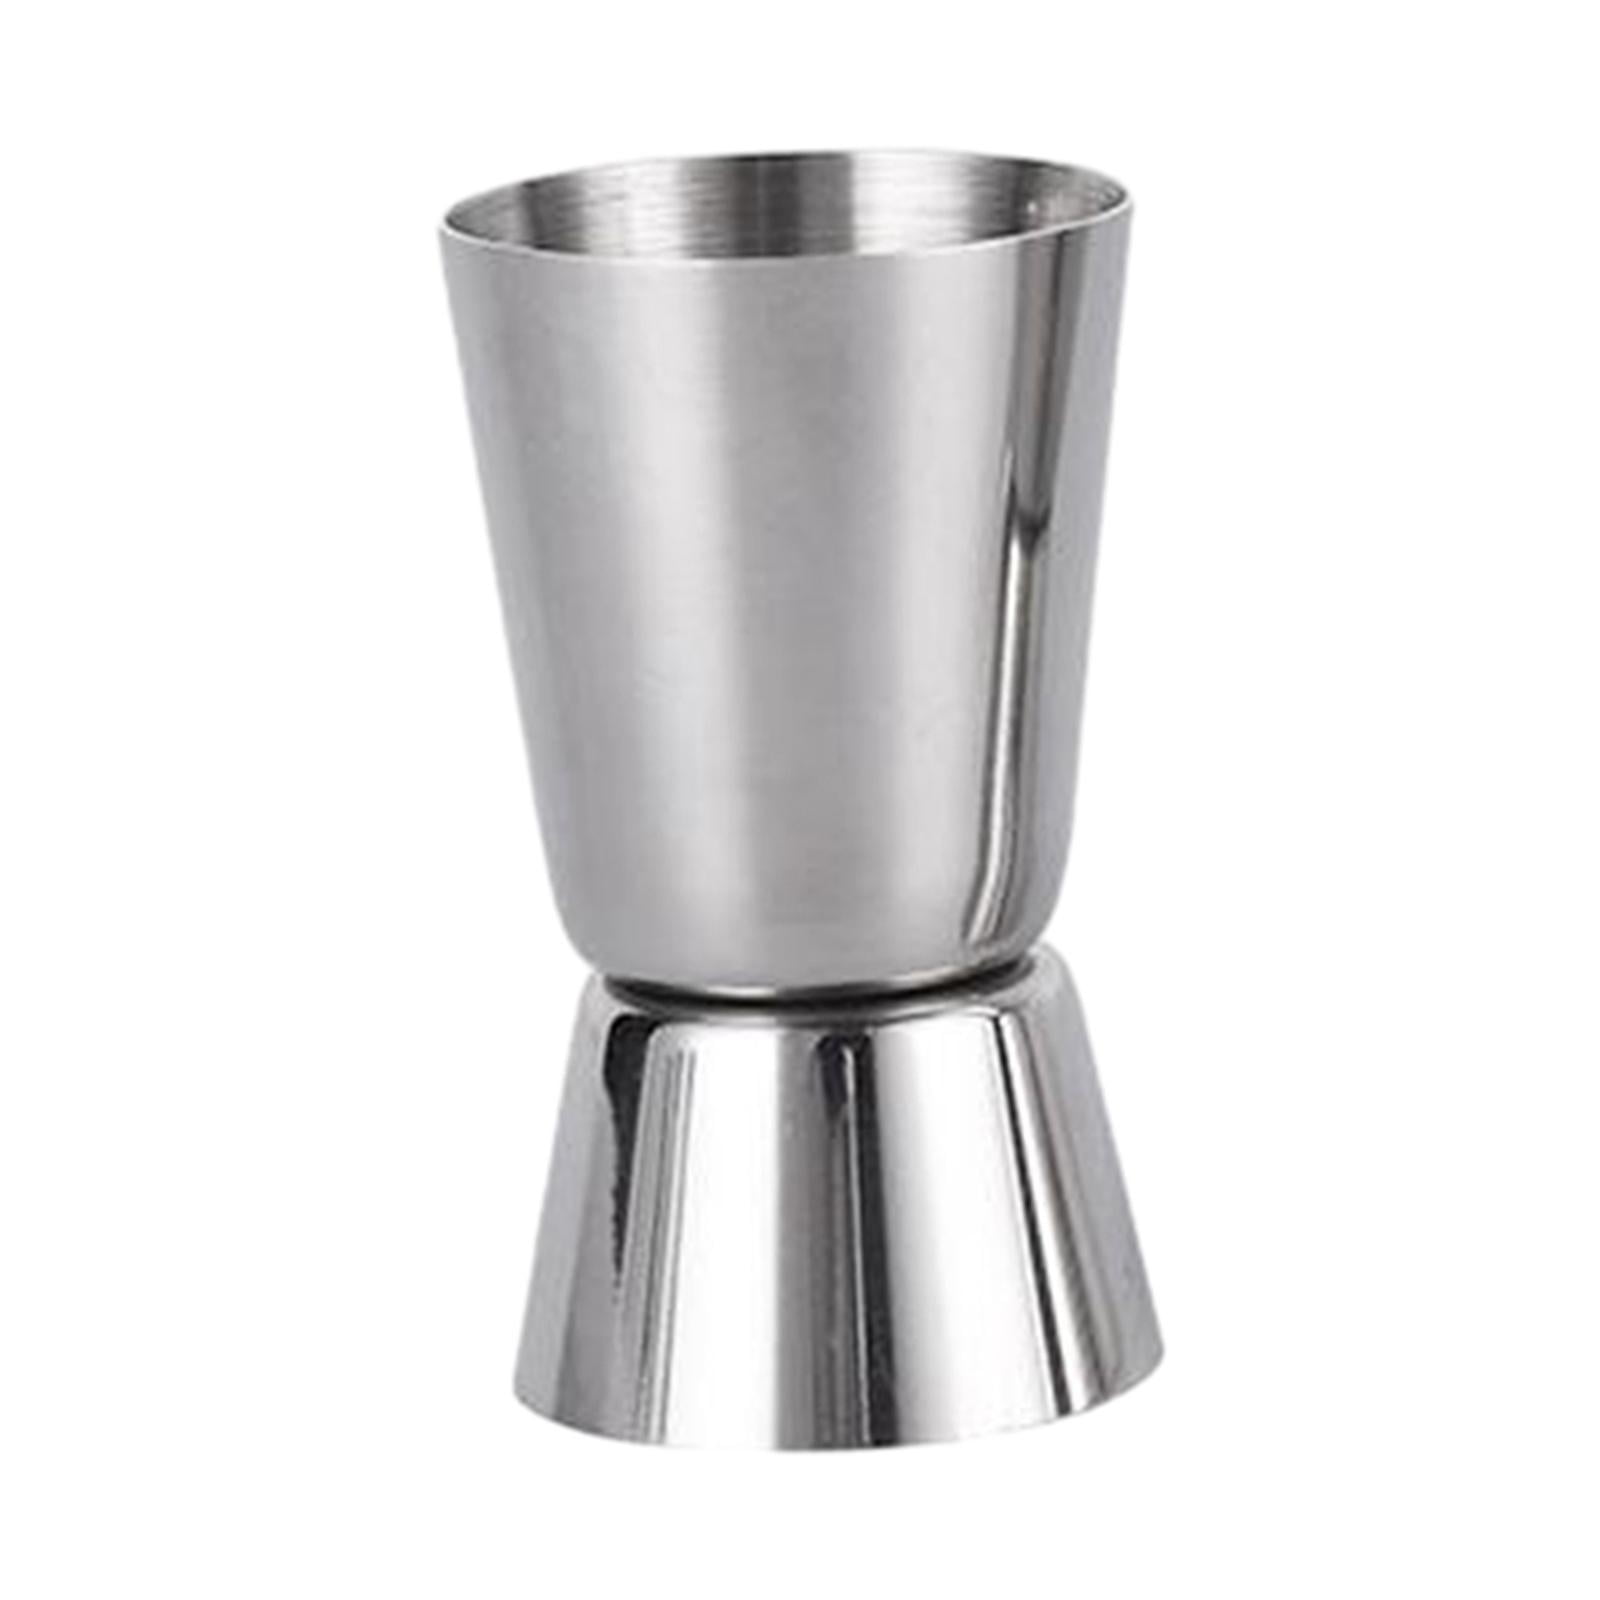 Tongina , Measuring Cup, Multifunctional Cocktail Jigger for Bar Camping Hotel Bartending Home 15ml or 30ml, Silver